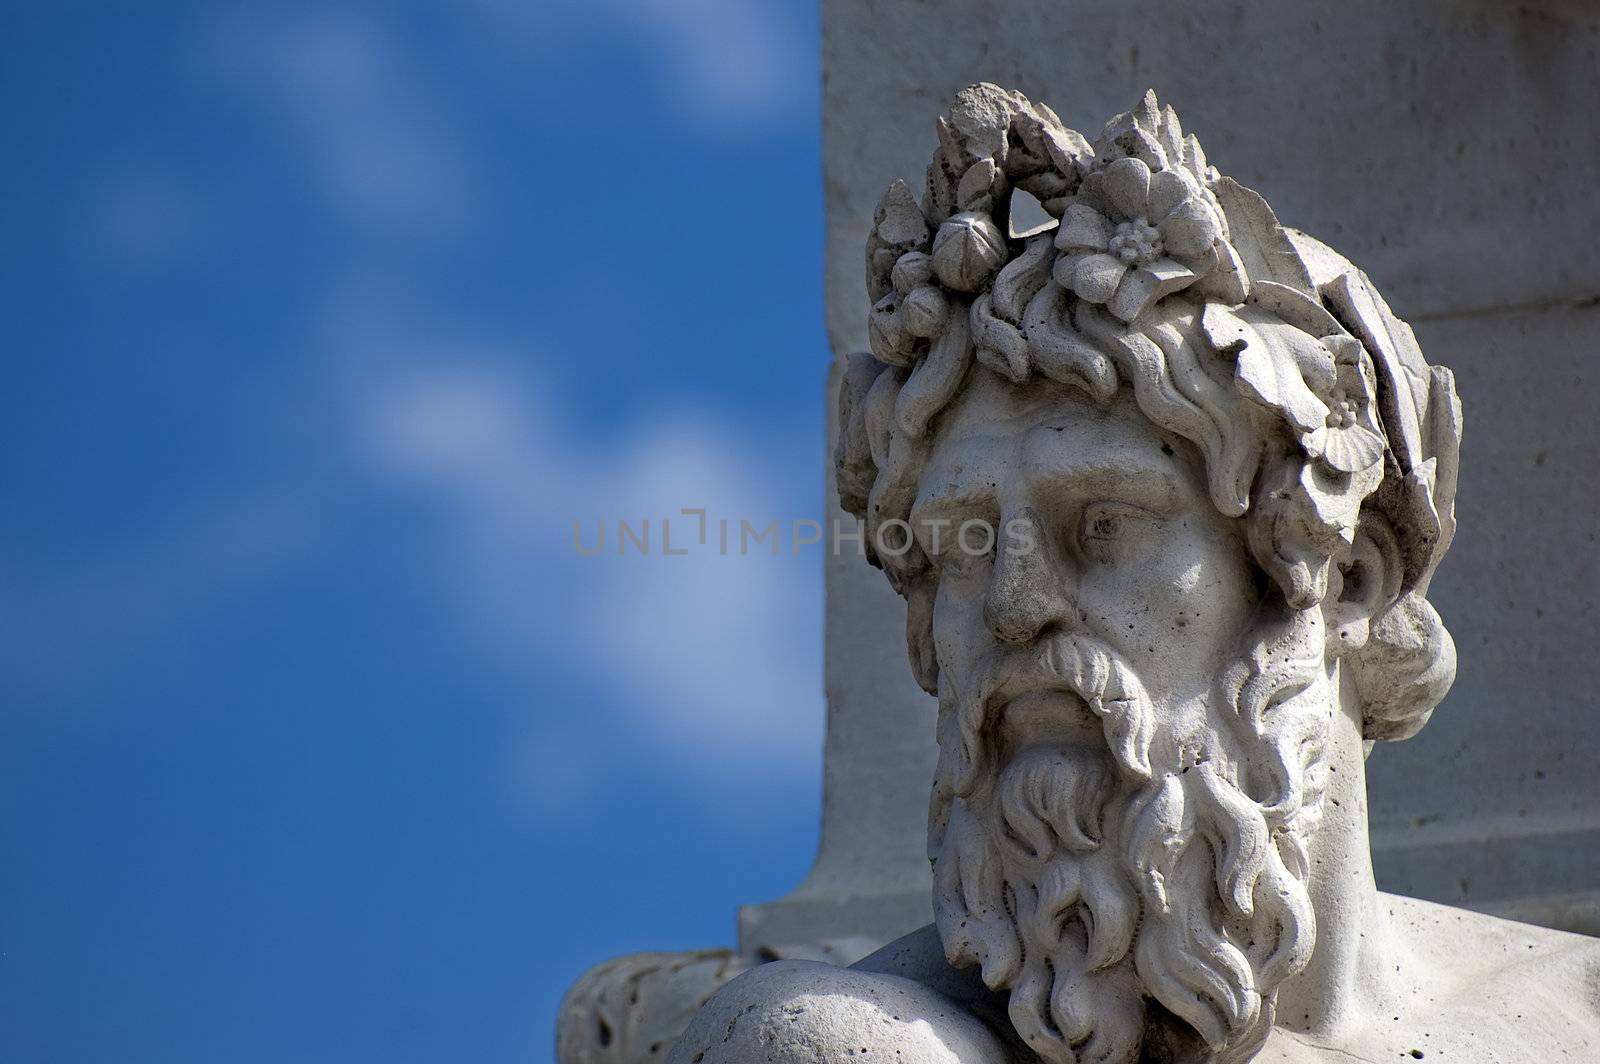 A marble head and a blue sky on background